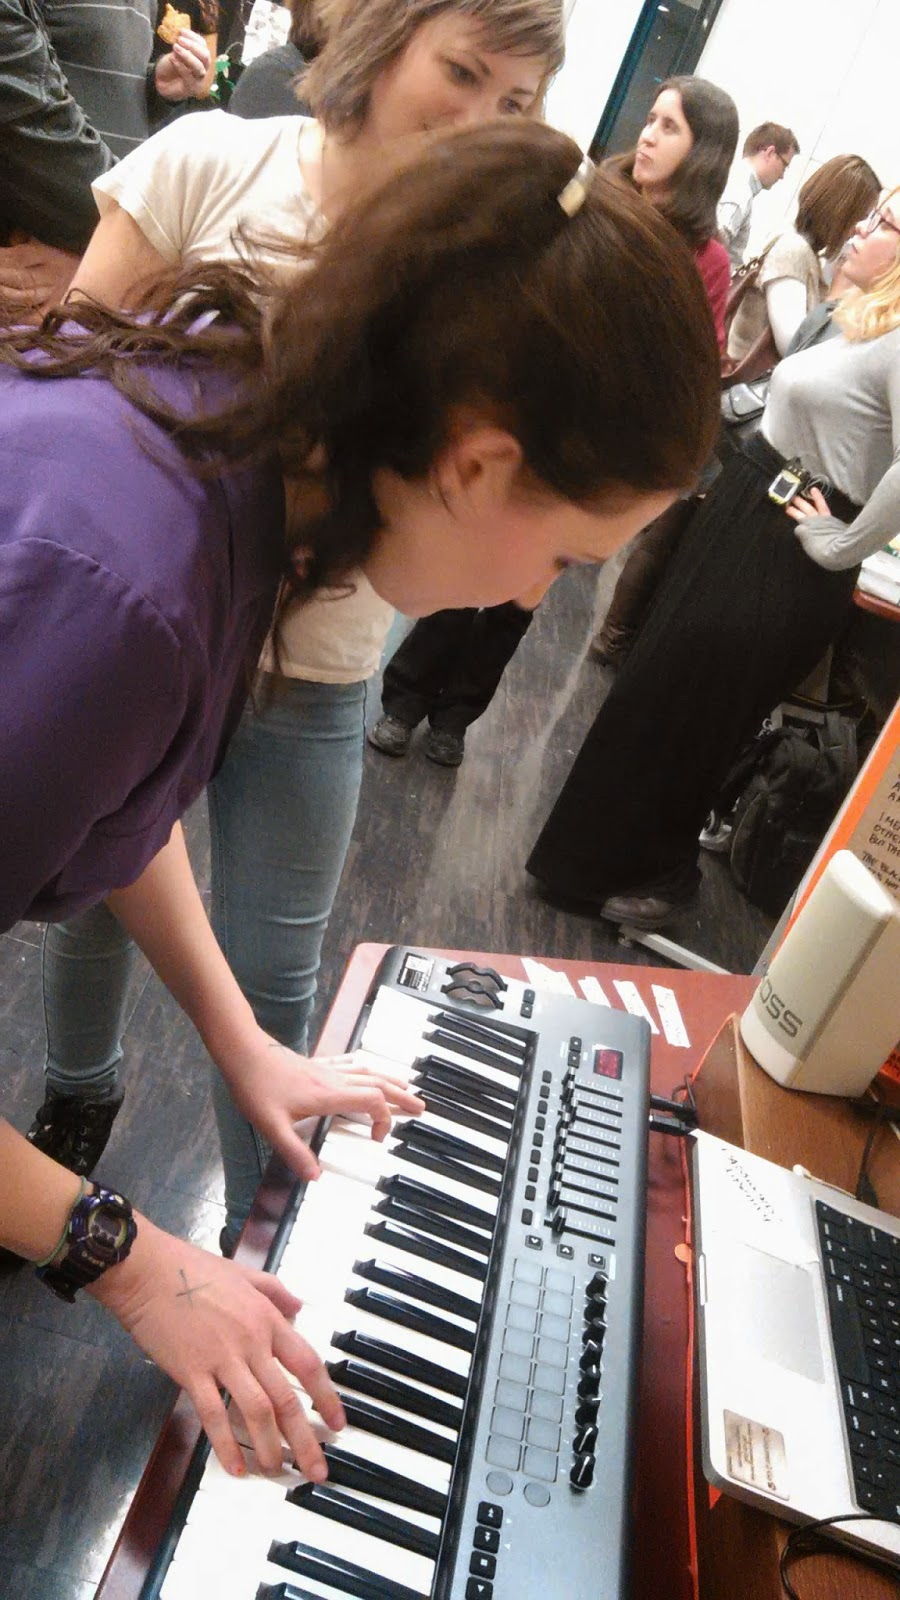 Photo of a woman playing a keyboard in a crowded room.